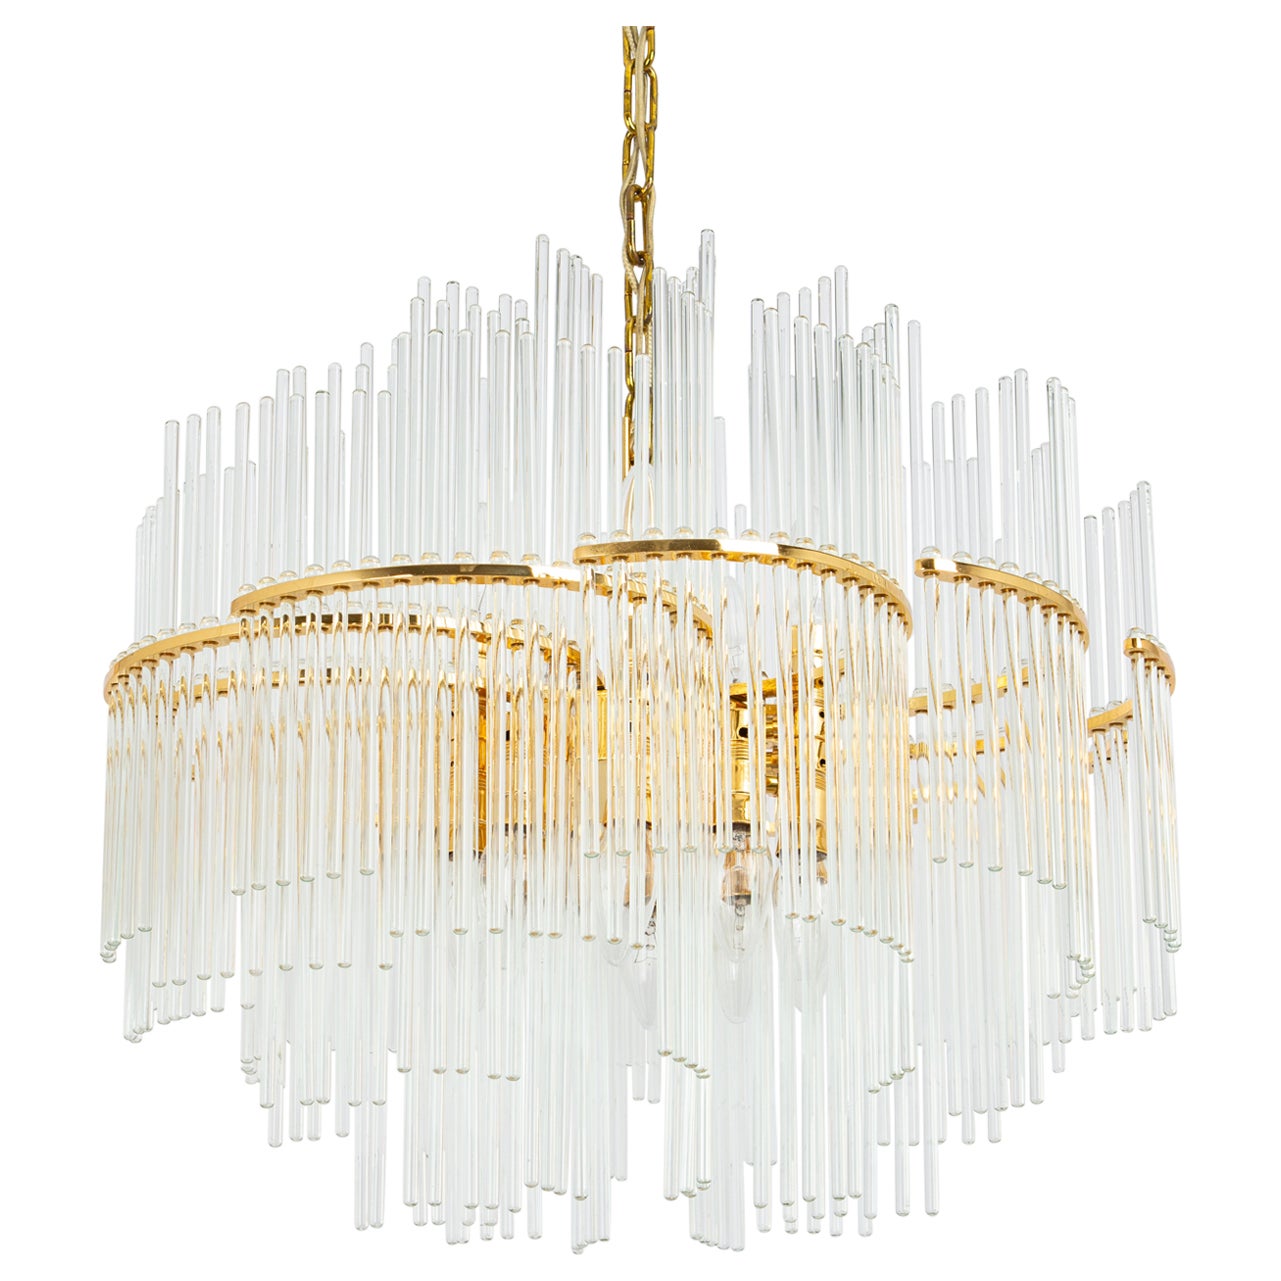 1 of 2 Stunning Gilt Brass and Crystal Glass Rods Chandelier by Palwa, 1970s For Sale